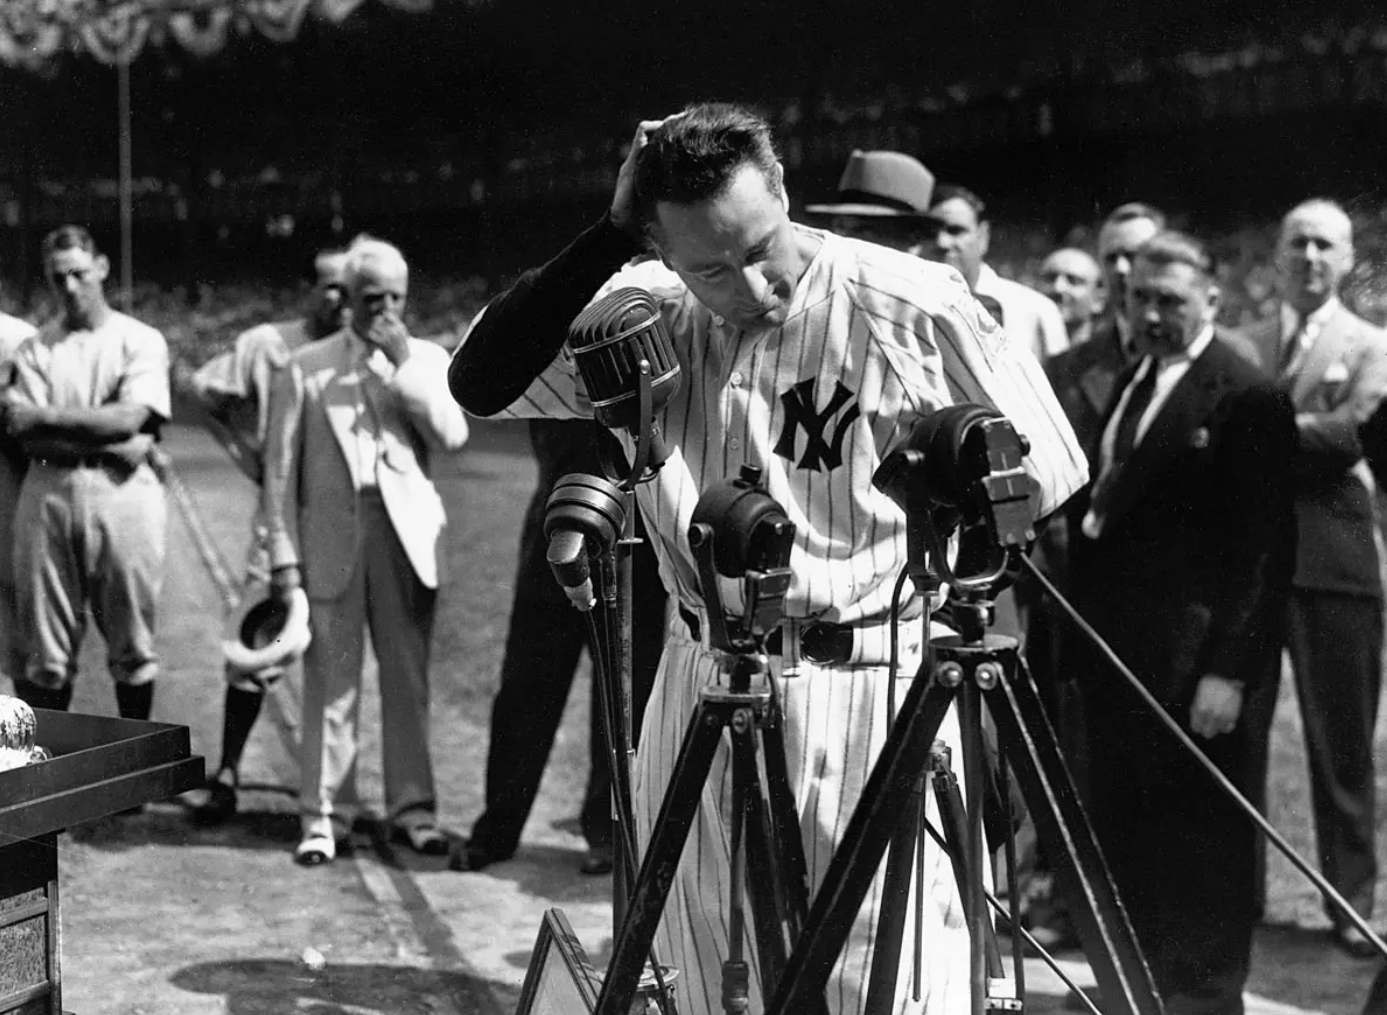 Lou Gehrig, 1939. "Luckiest man on the face of the earth" speech. Photo by: 
UPI/Bettman/Corbis.